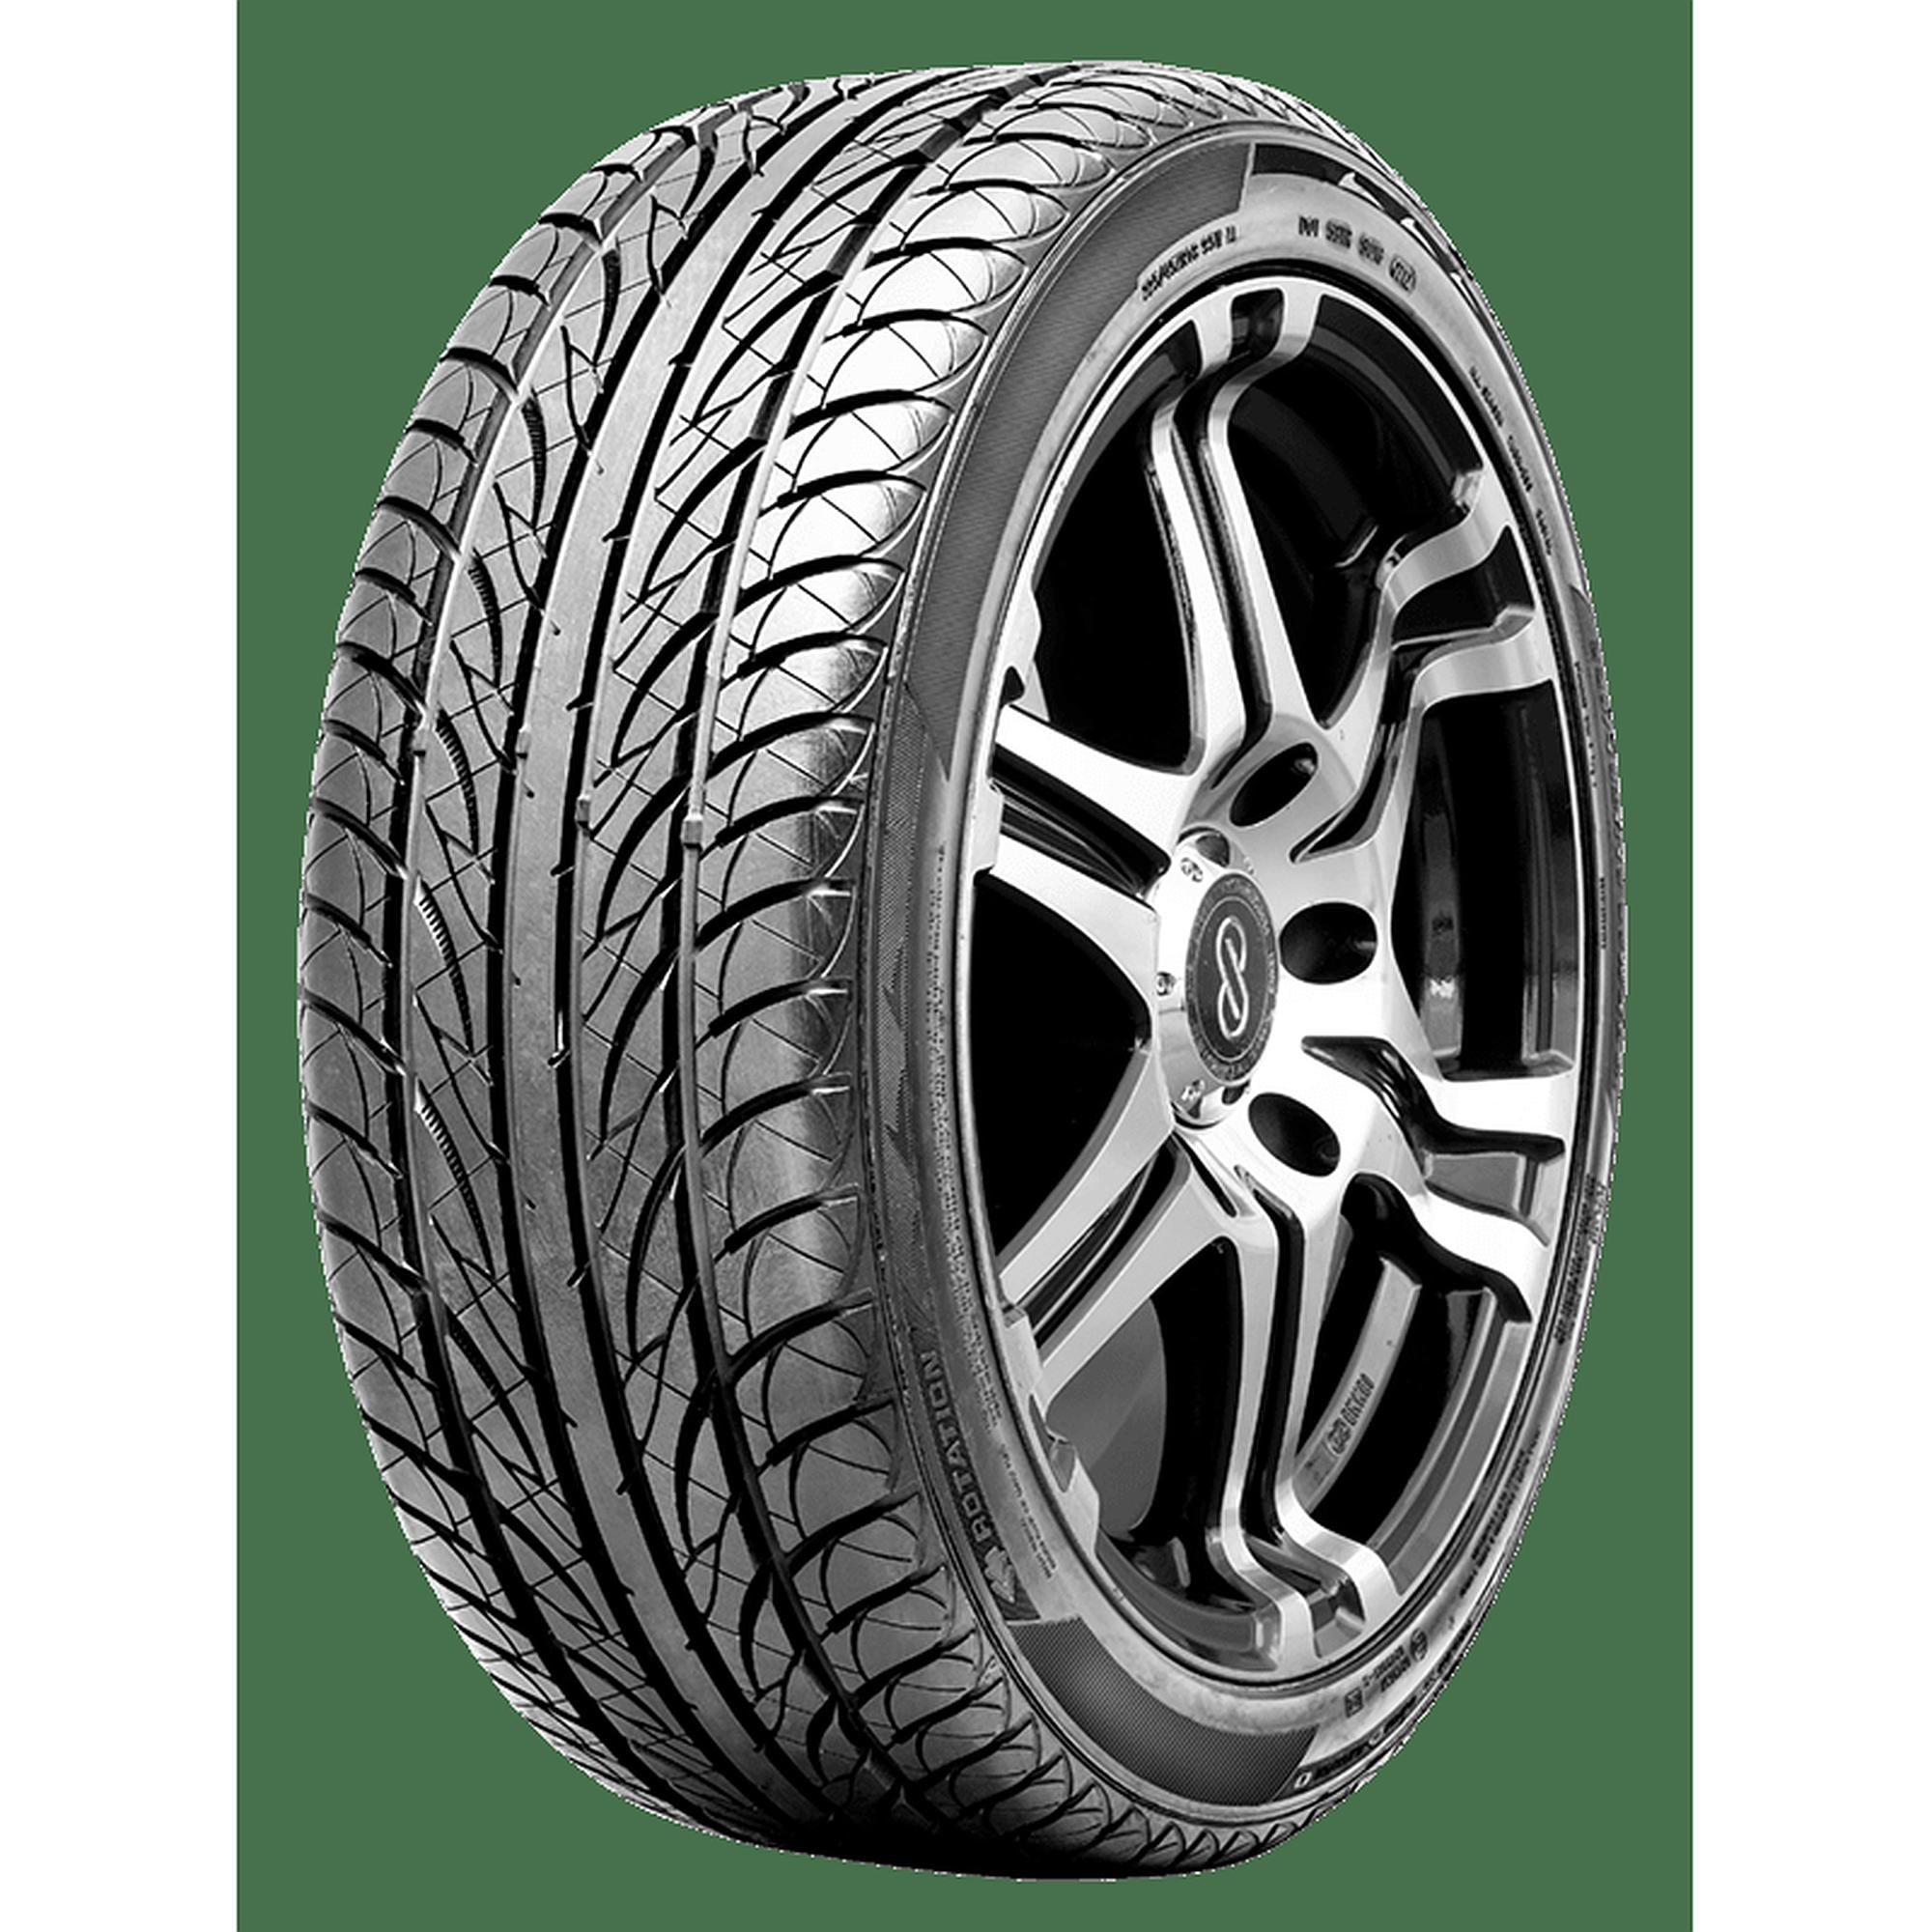 Kumho WinterCraft Ice WP51 155/60R15 74T BSW (2 Tires) Fits: 2008-10 Smart  Fortwo Passion Cabrio, 2012-15 Smart Fortwo Electric Drive